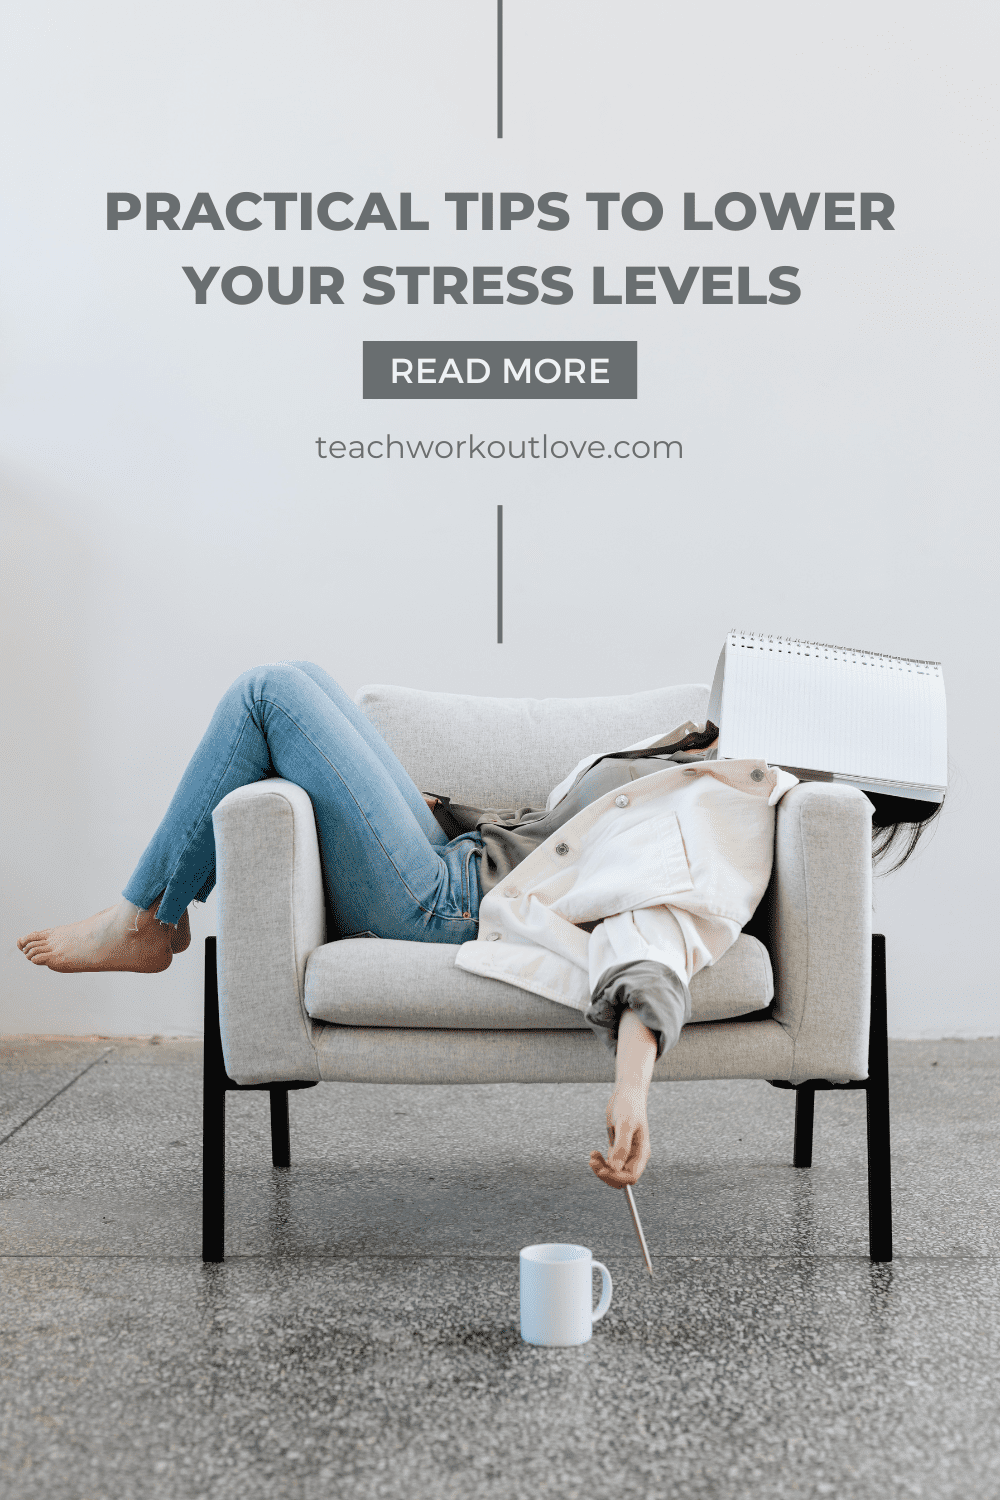 Making positive changes in your life that reduce your stress levels can seem impossible when you feel under pressure. But, implementing some practical solutions should help to begin lowering your stress levels and help you feel so much better. Here are some helpful tips to help you lower your stress levels: